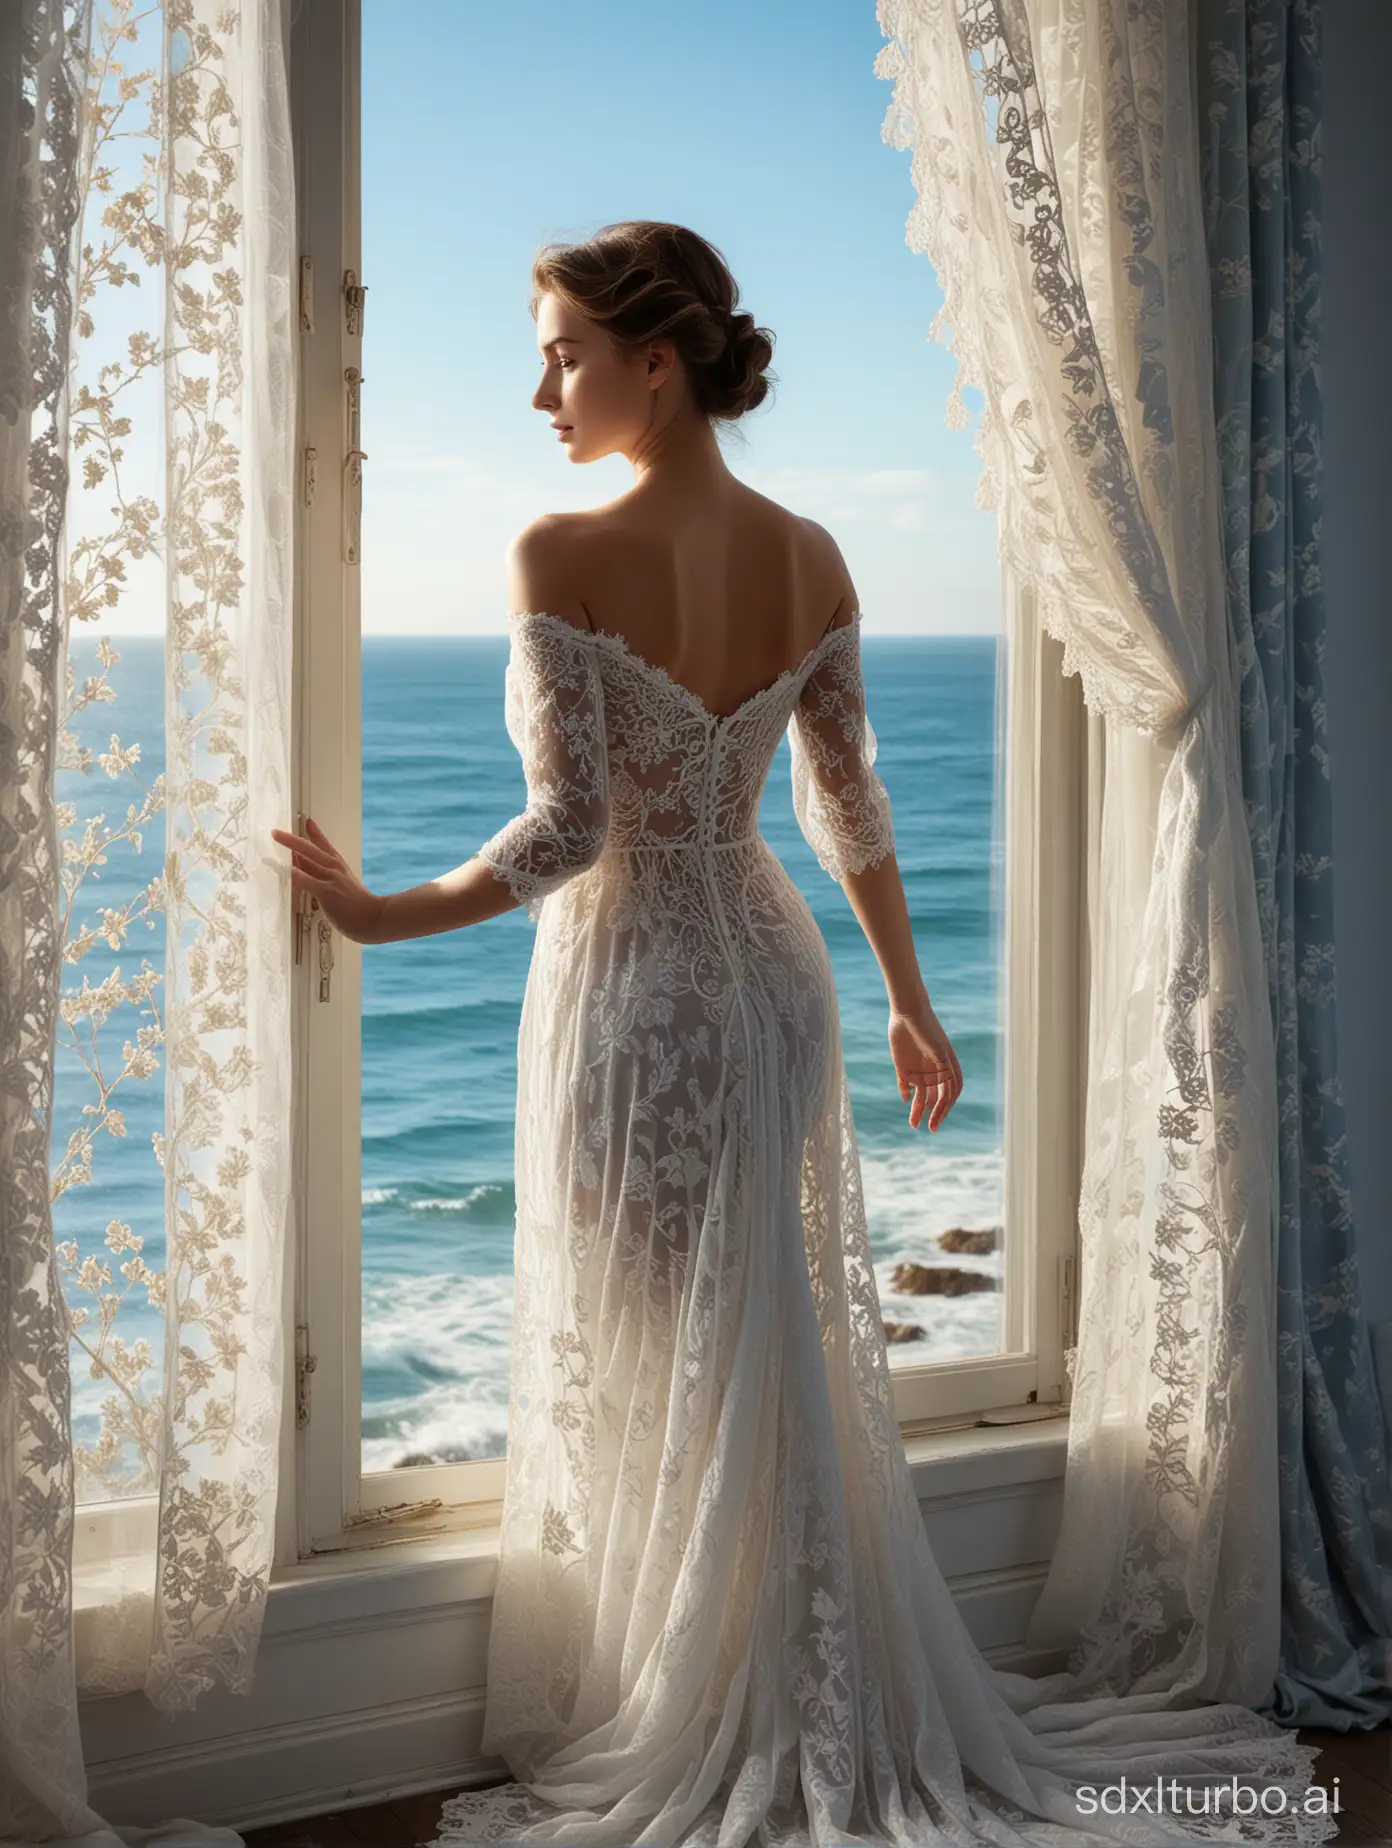 Imagine a stunning scene where a beautiful woman gazes out of a window, her silhouette framed against the backdrop of a vast blue sea stretching towards the horizon. The gentle sunlight bathes her features, accentuating her delicate beauty as she contemplates the endless expanse ahead. Every detail, from the intricate lace curtains gently swaying in the breeze to the subtle interplay of light on her skin, adds depth and richness to the composition. It's a moment frozen in time, reminiscent of the timeless elegance captured by artists like Monet in his tranquil seascapes.